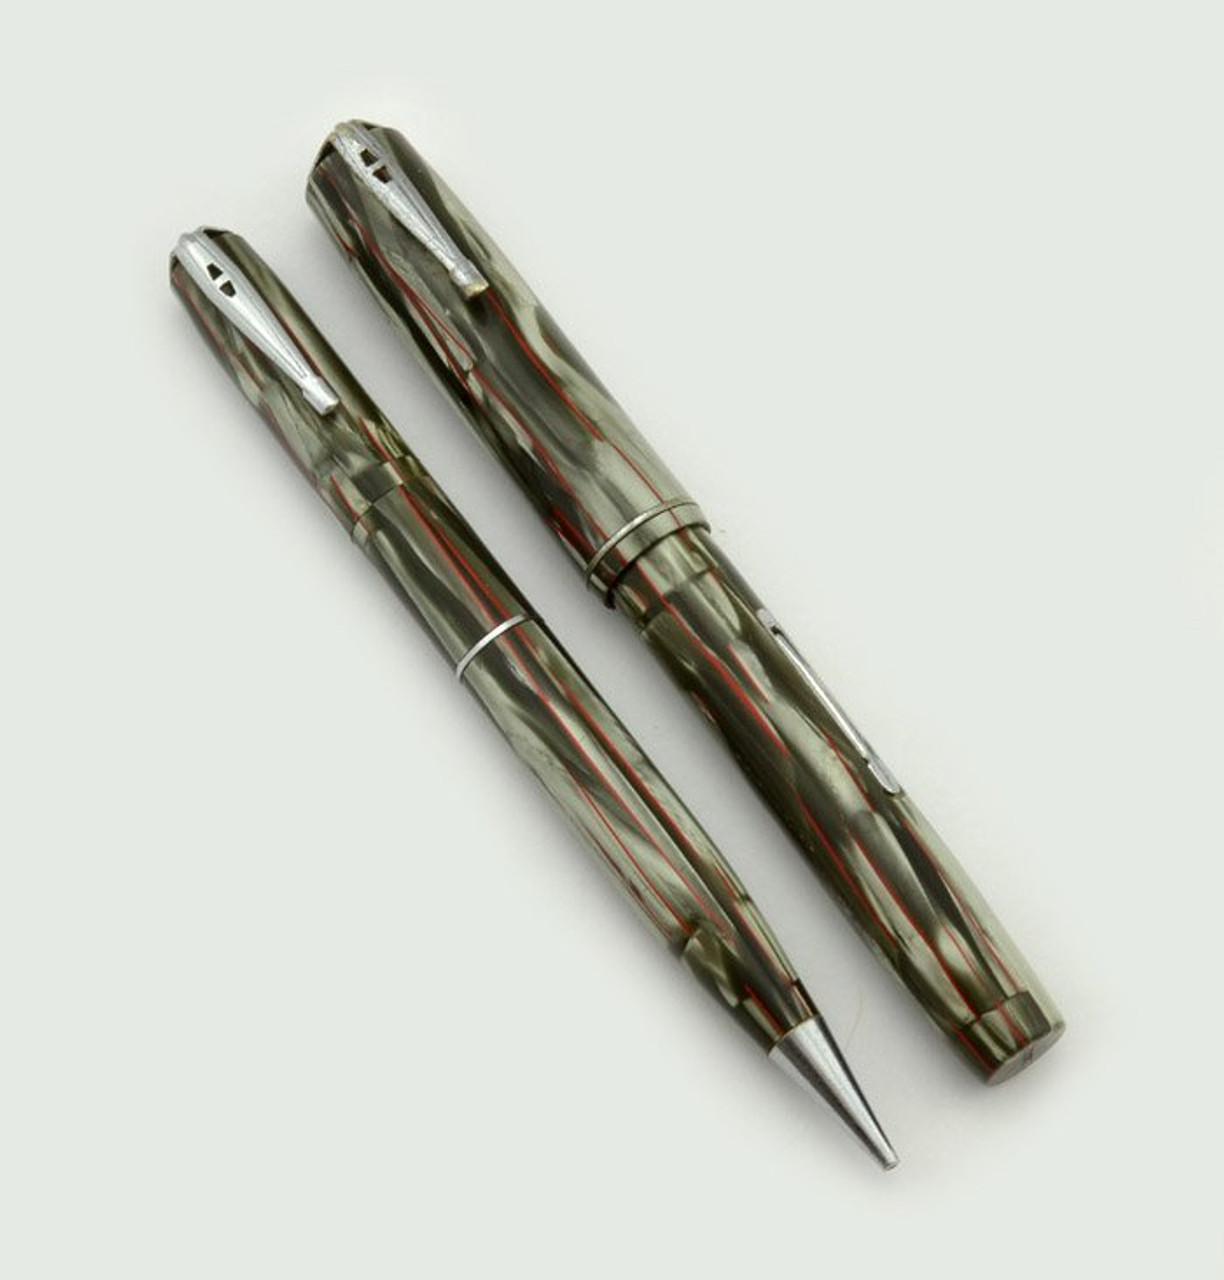 Waterman Thorobred 3V/32V Fountain Pen Set -1930s, Grey Marble with Red Veins, 14k Extra Fine Semi-Flex (Excellent, Restored)